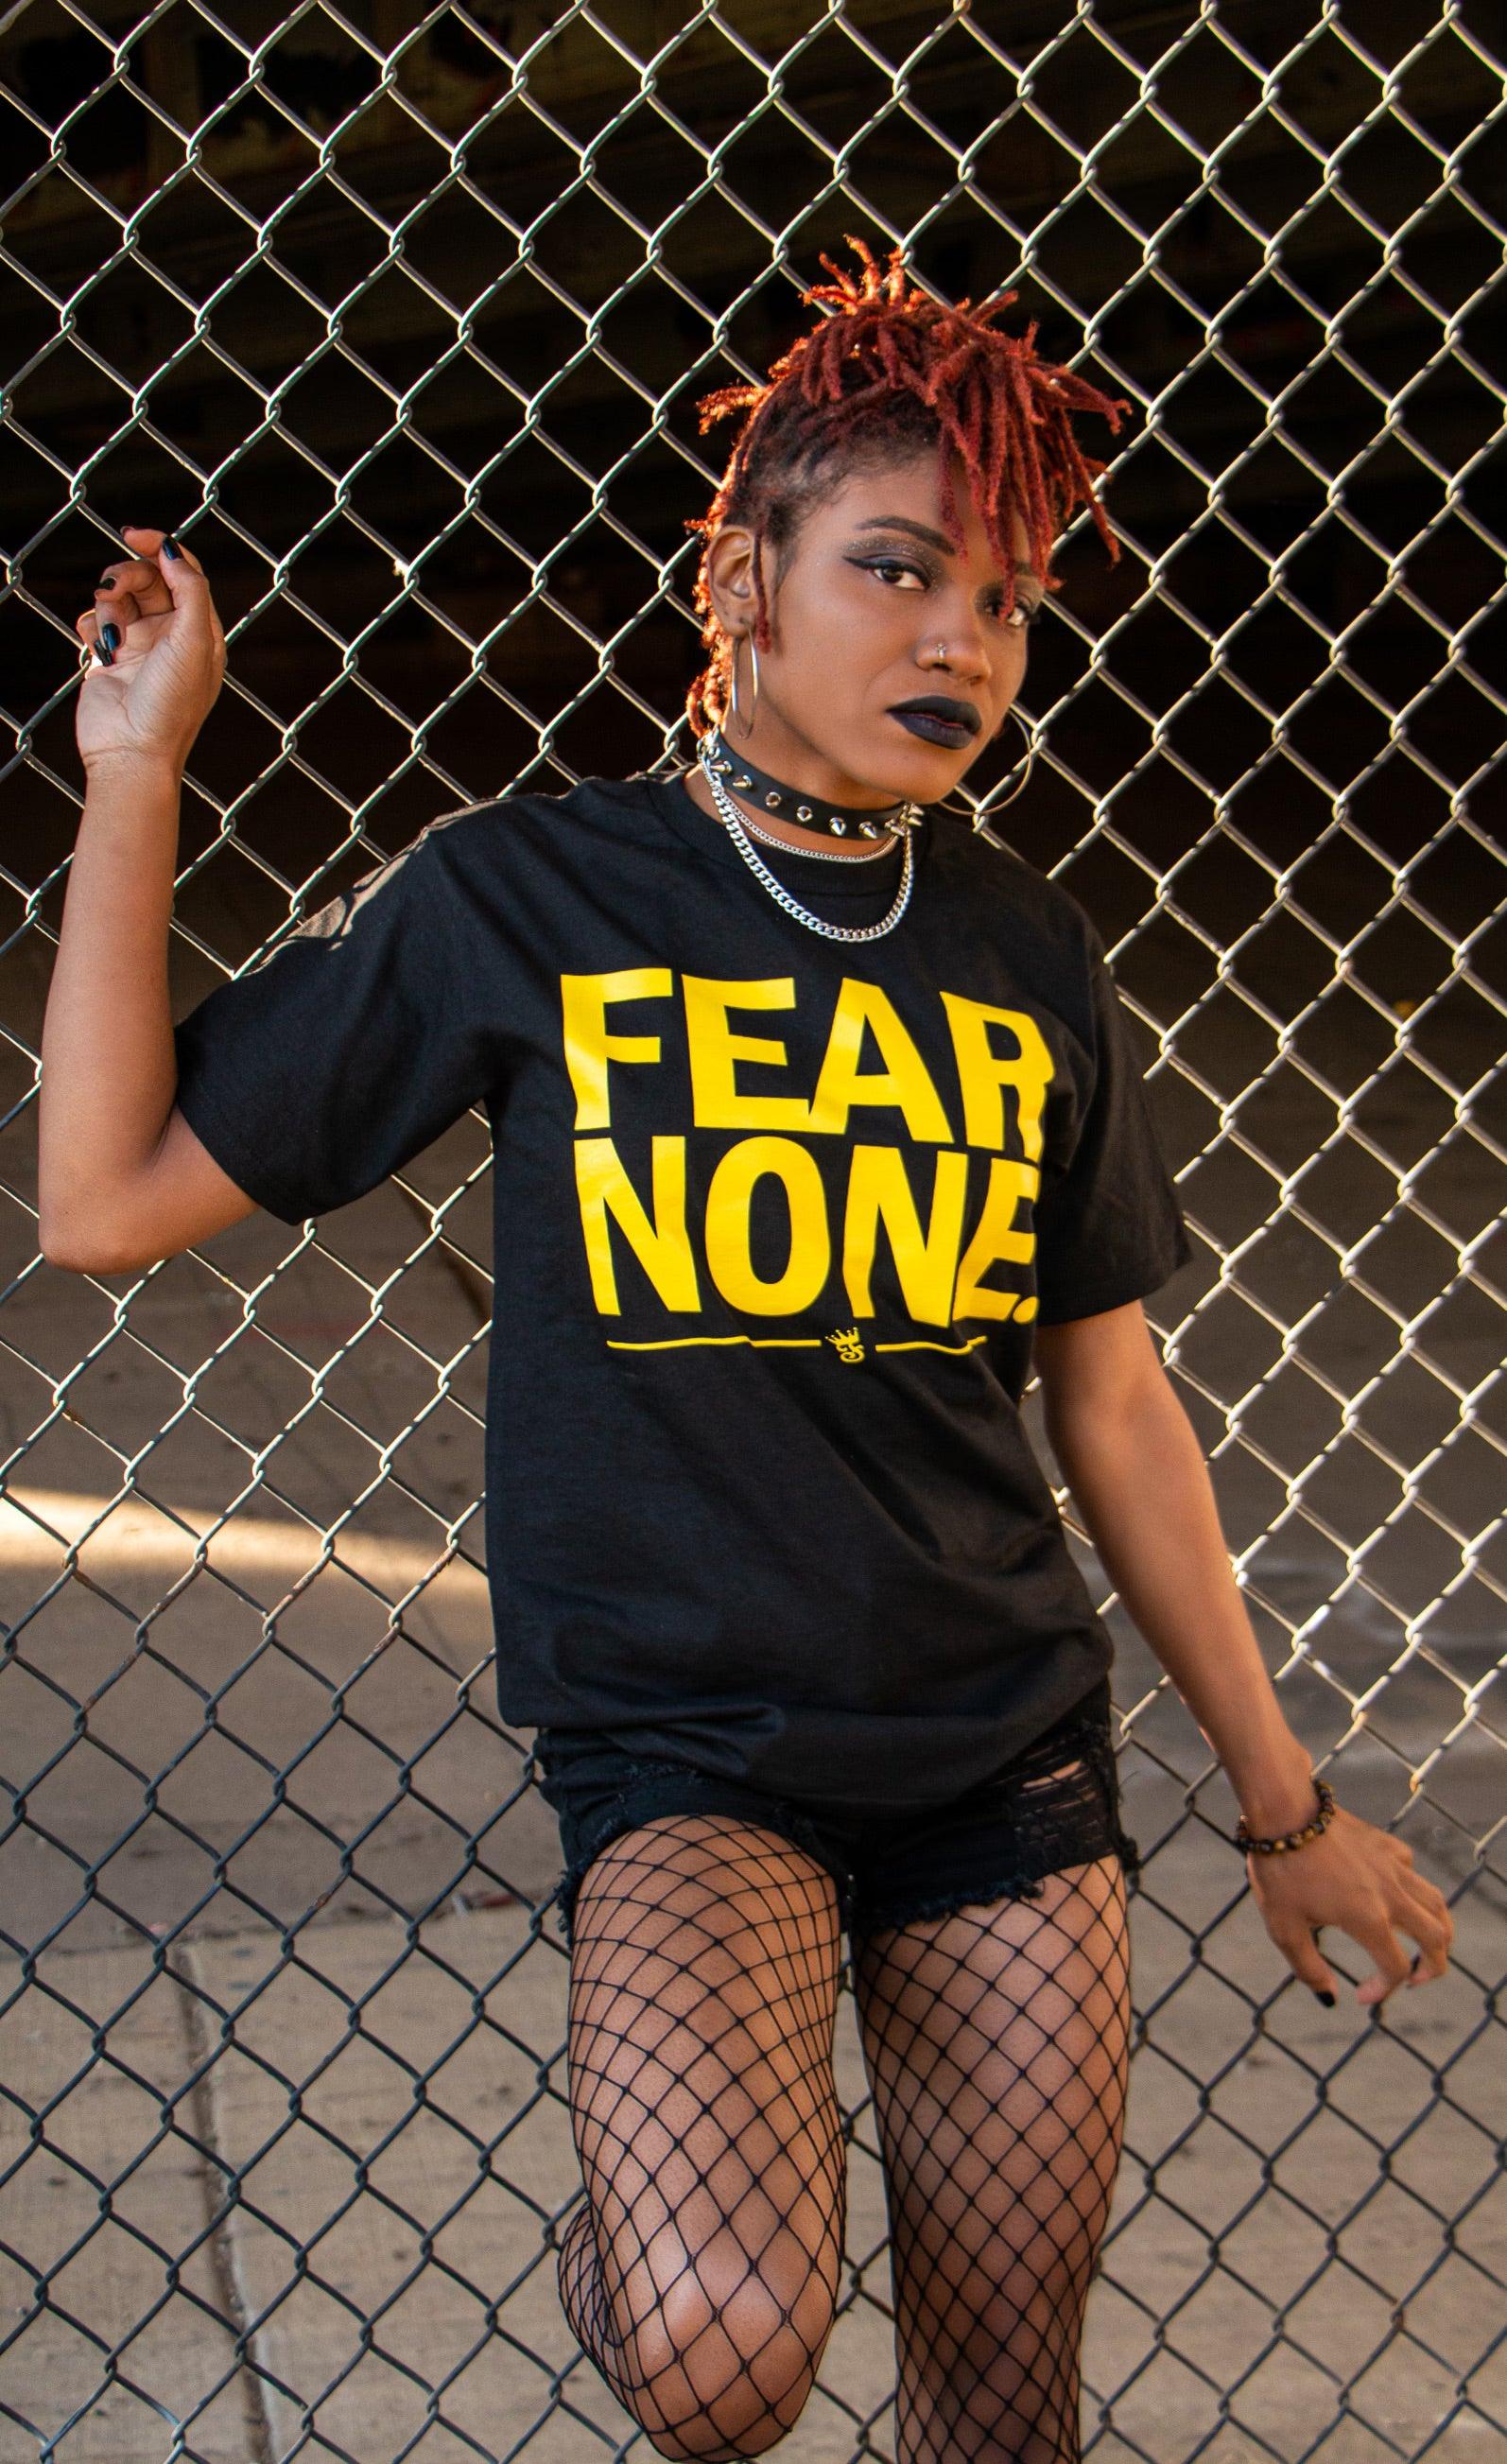 FEAR NONE T-SHIRT - Famous Club Clothing